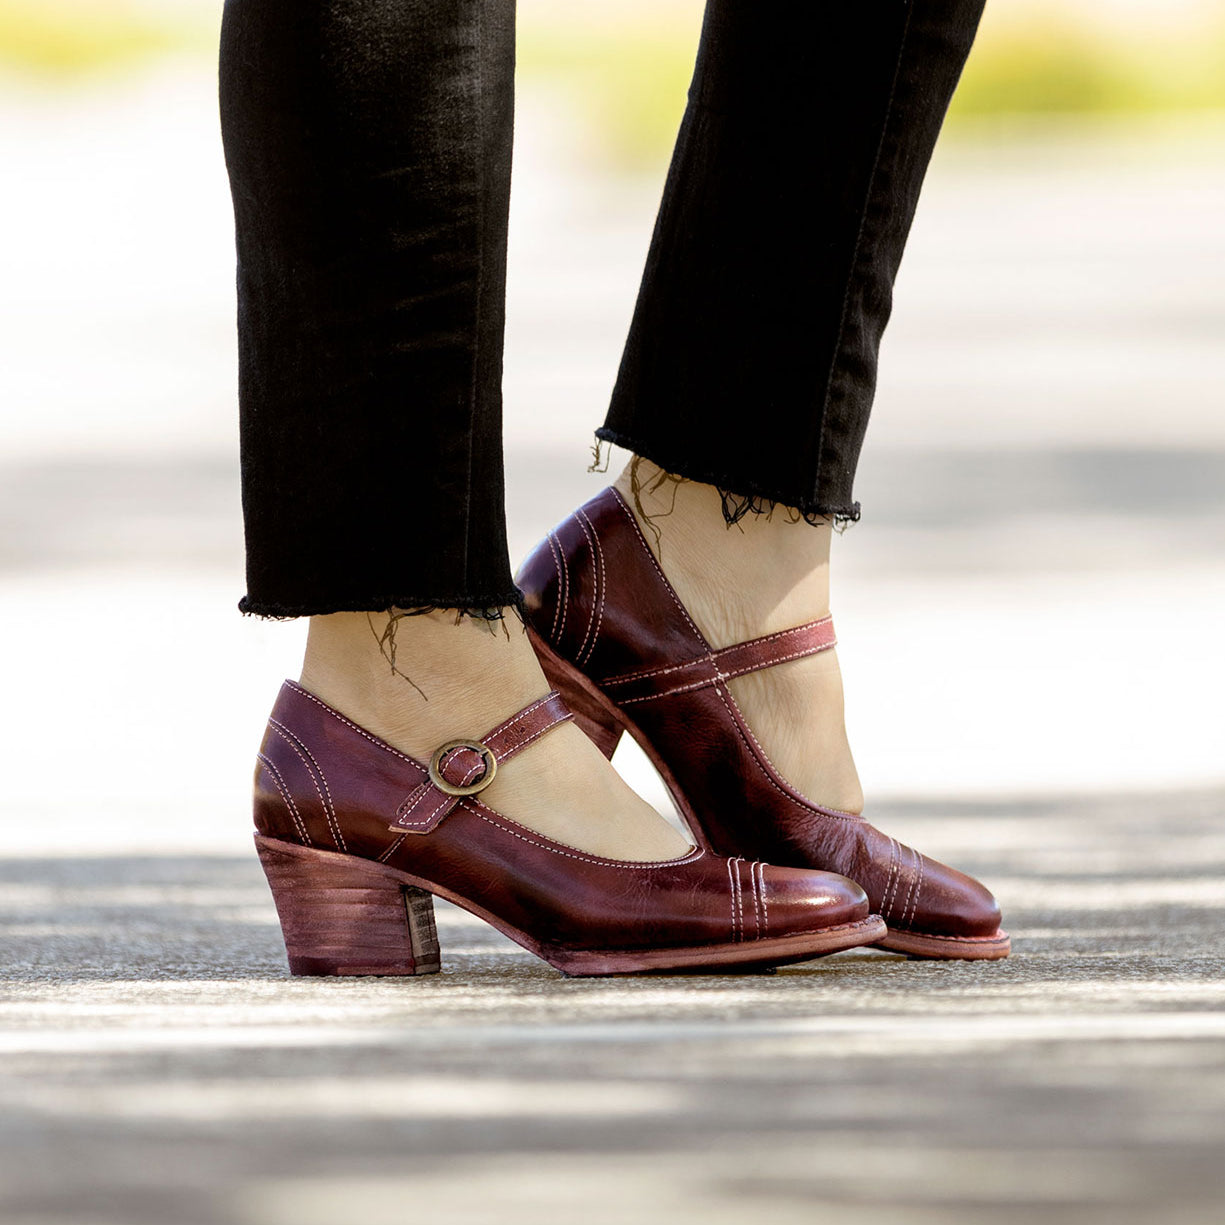 A woman wearing a pair of burgundy Oak Tree Farms mary jane shoes in Twigley style.